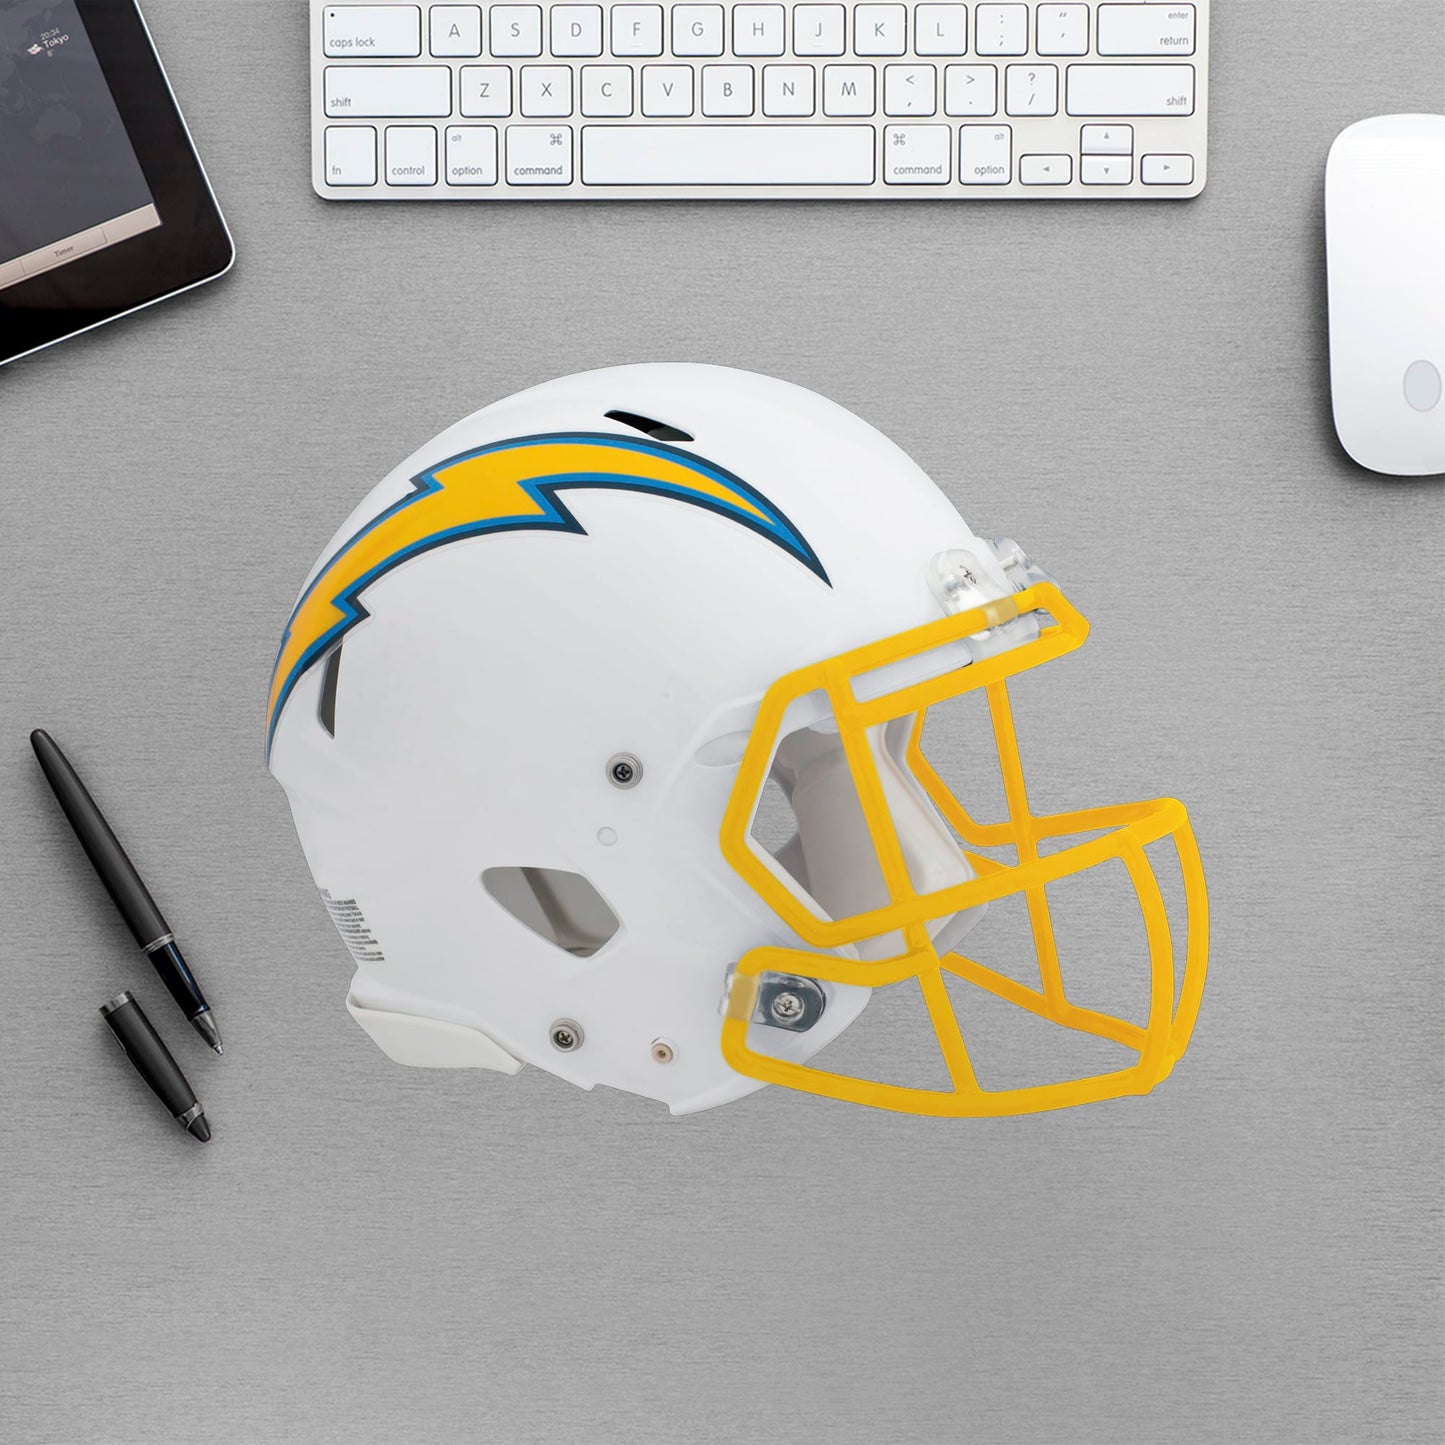 Los Angeles Chargers:  Helmet        - Officially Licensed NFL Removable     Adhesive Decal